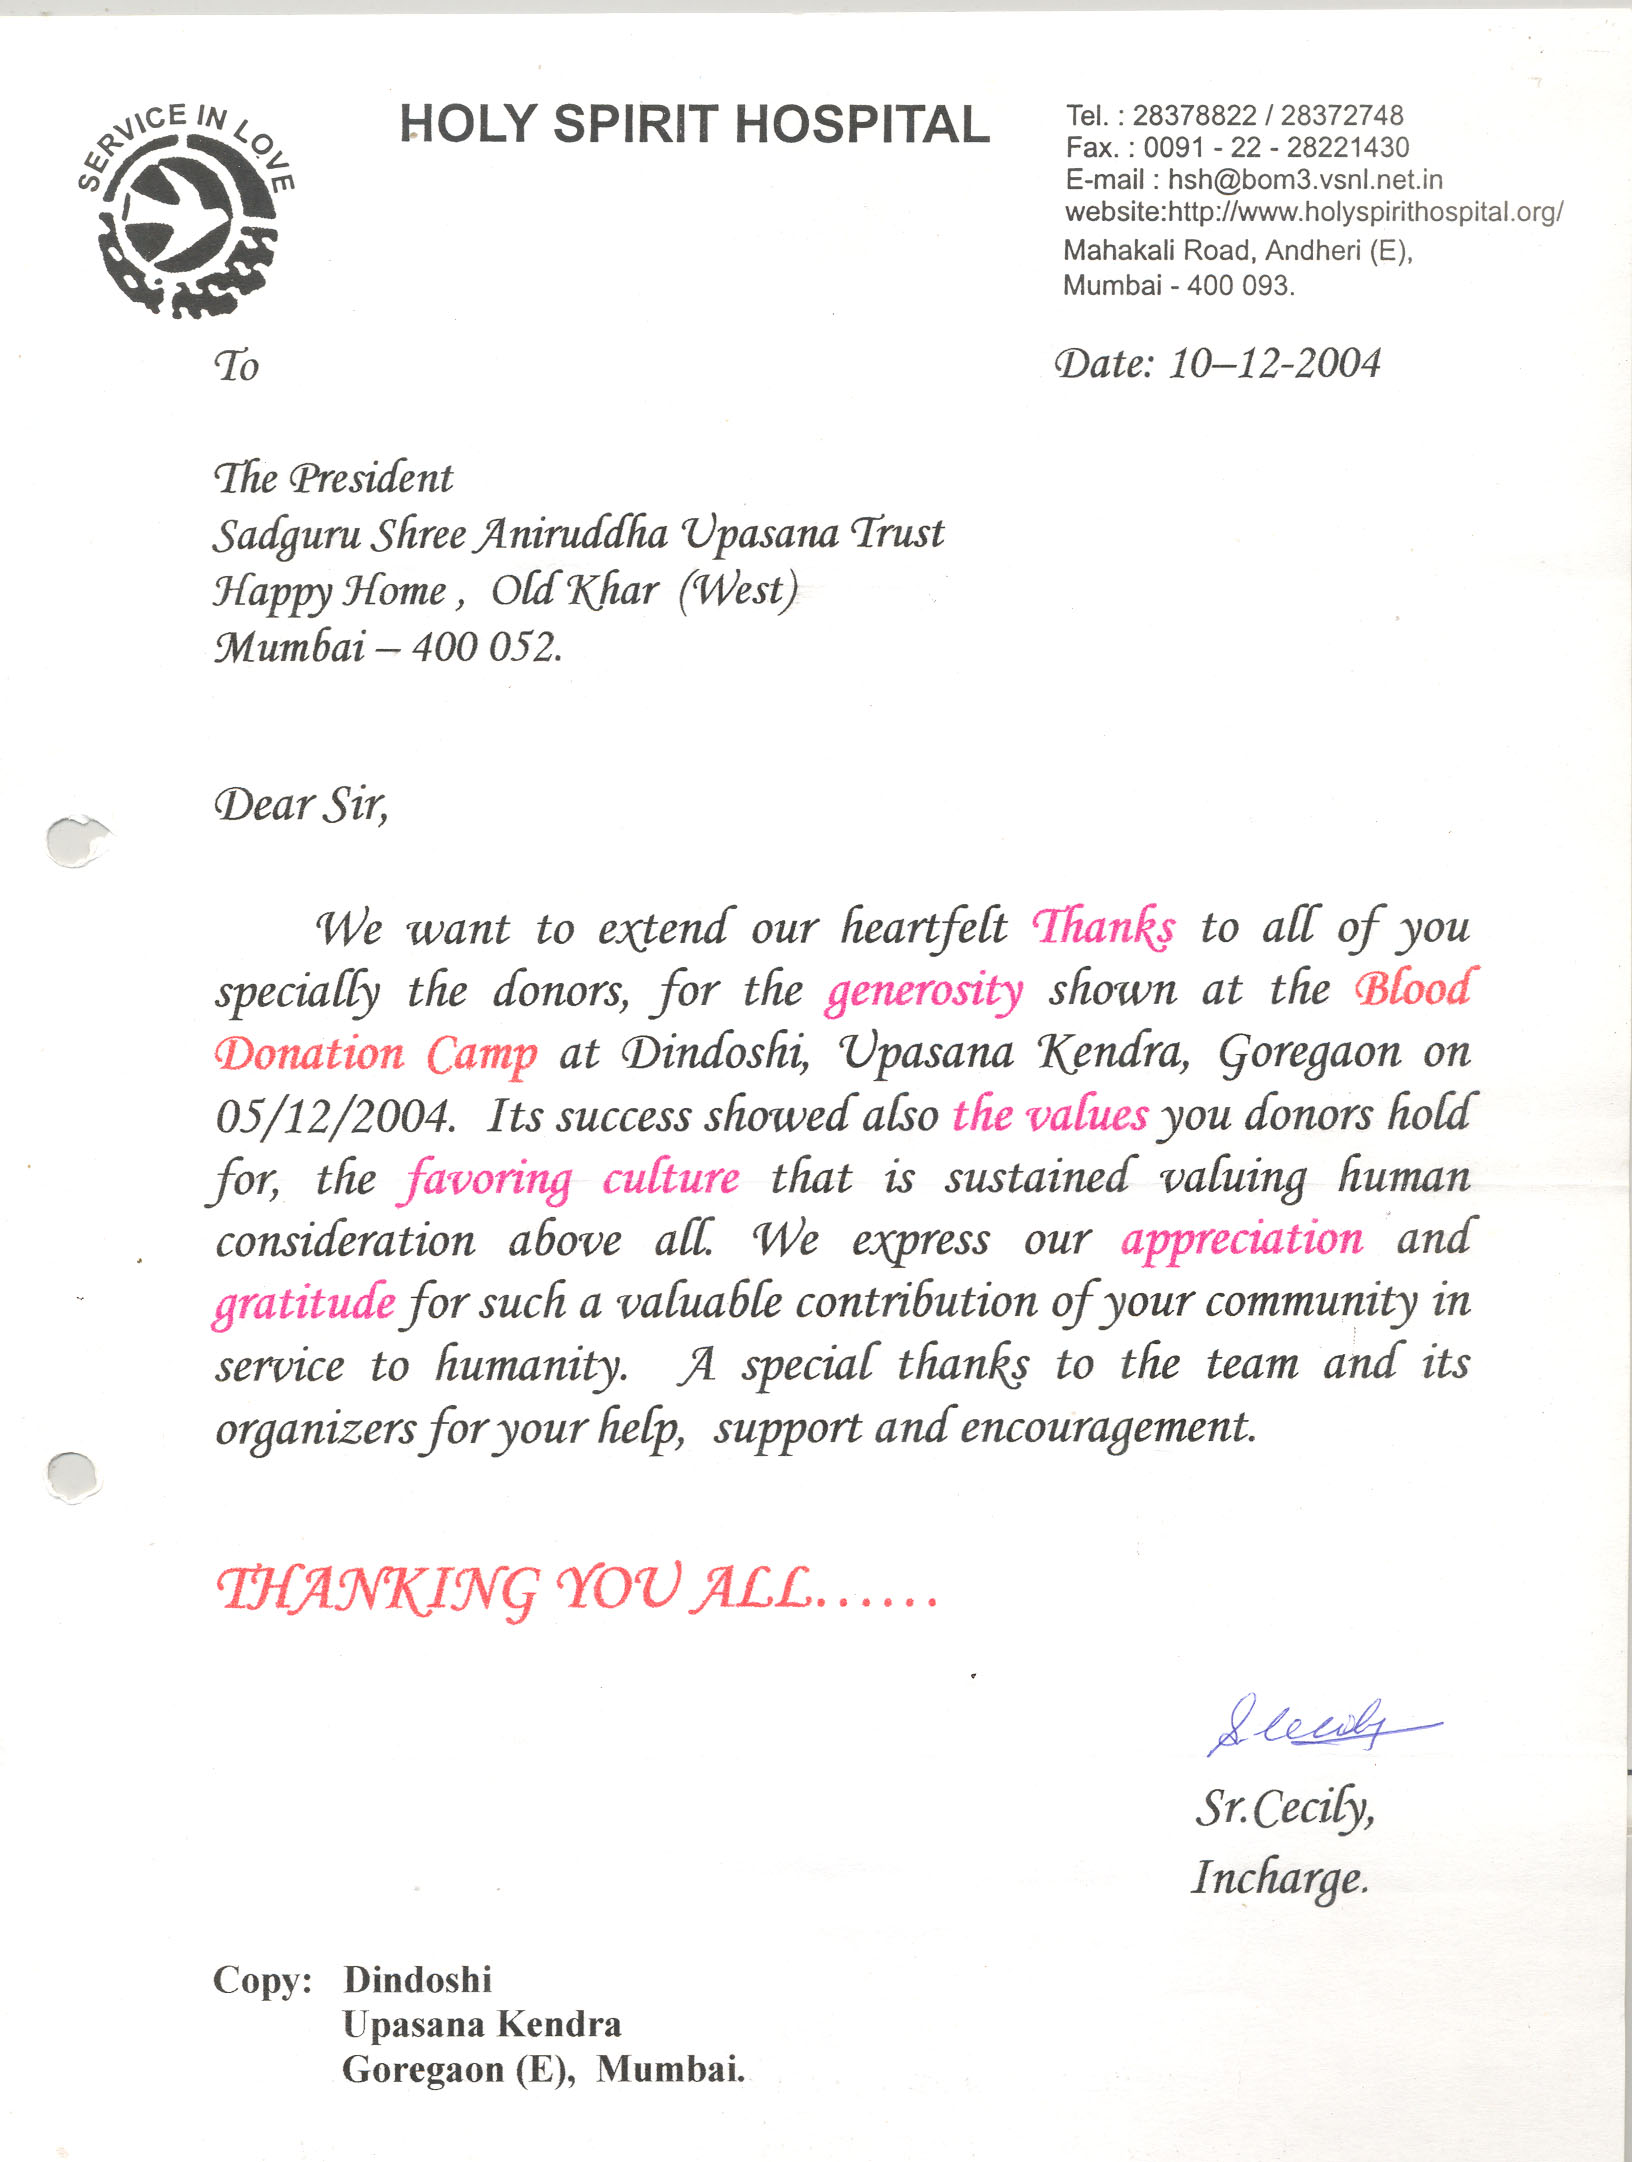 Appreciation-Letter from Holy Spirit Hospital 2004-for-Aniruddhafoundation-Compassion-Social-services